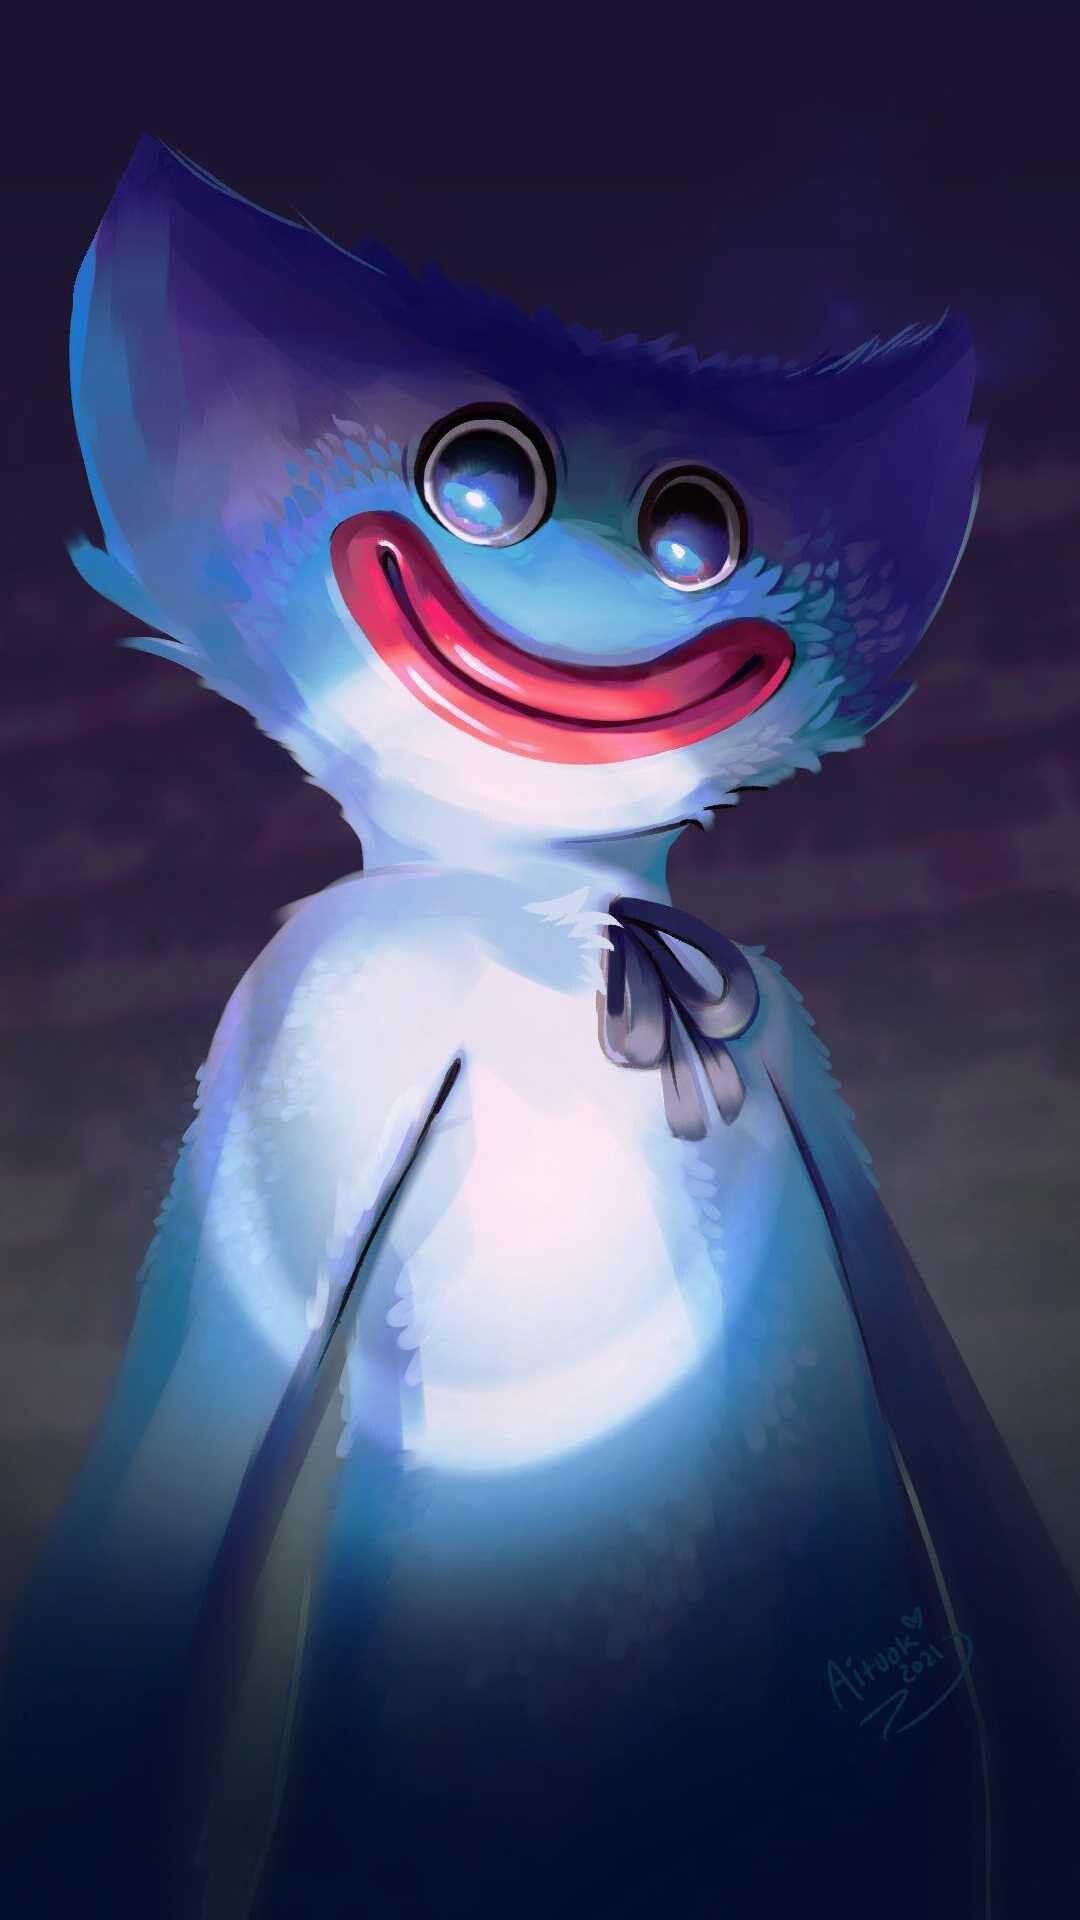 Huggy Wuggy: A monster standing at a towering height of at least 10 feet, Red lips, Creature's eyes resemble googly eyes. 1080x1920 Full HD Wallpaper.